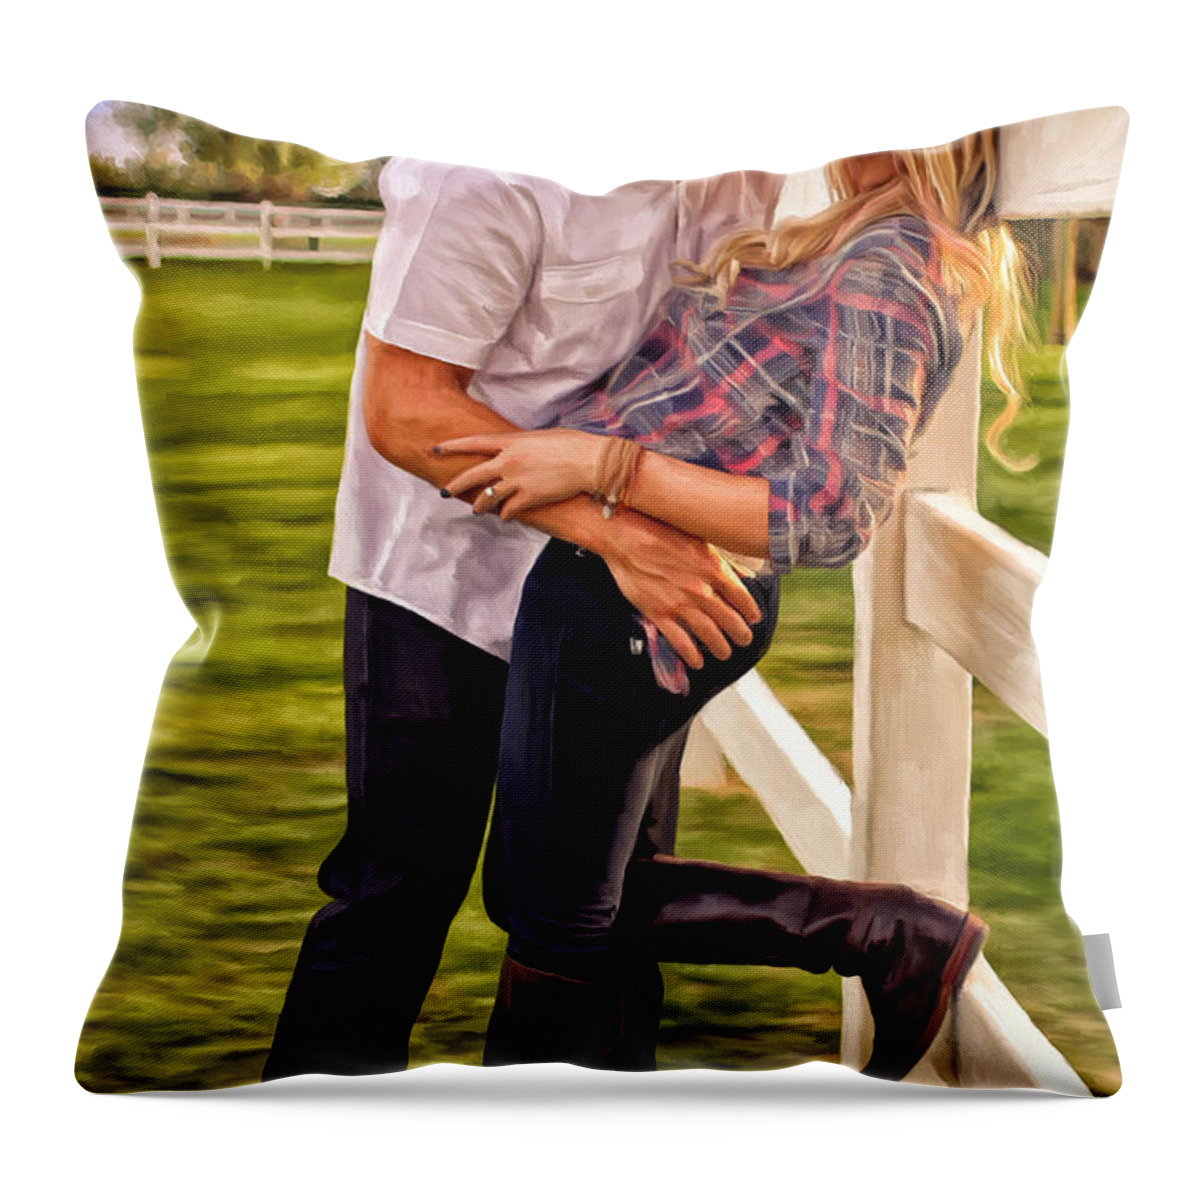 Kiss Throw Pillow featuring the painting Twas Not My Lips You Kissed But My Soul by Michael Pickett